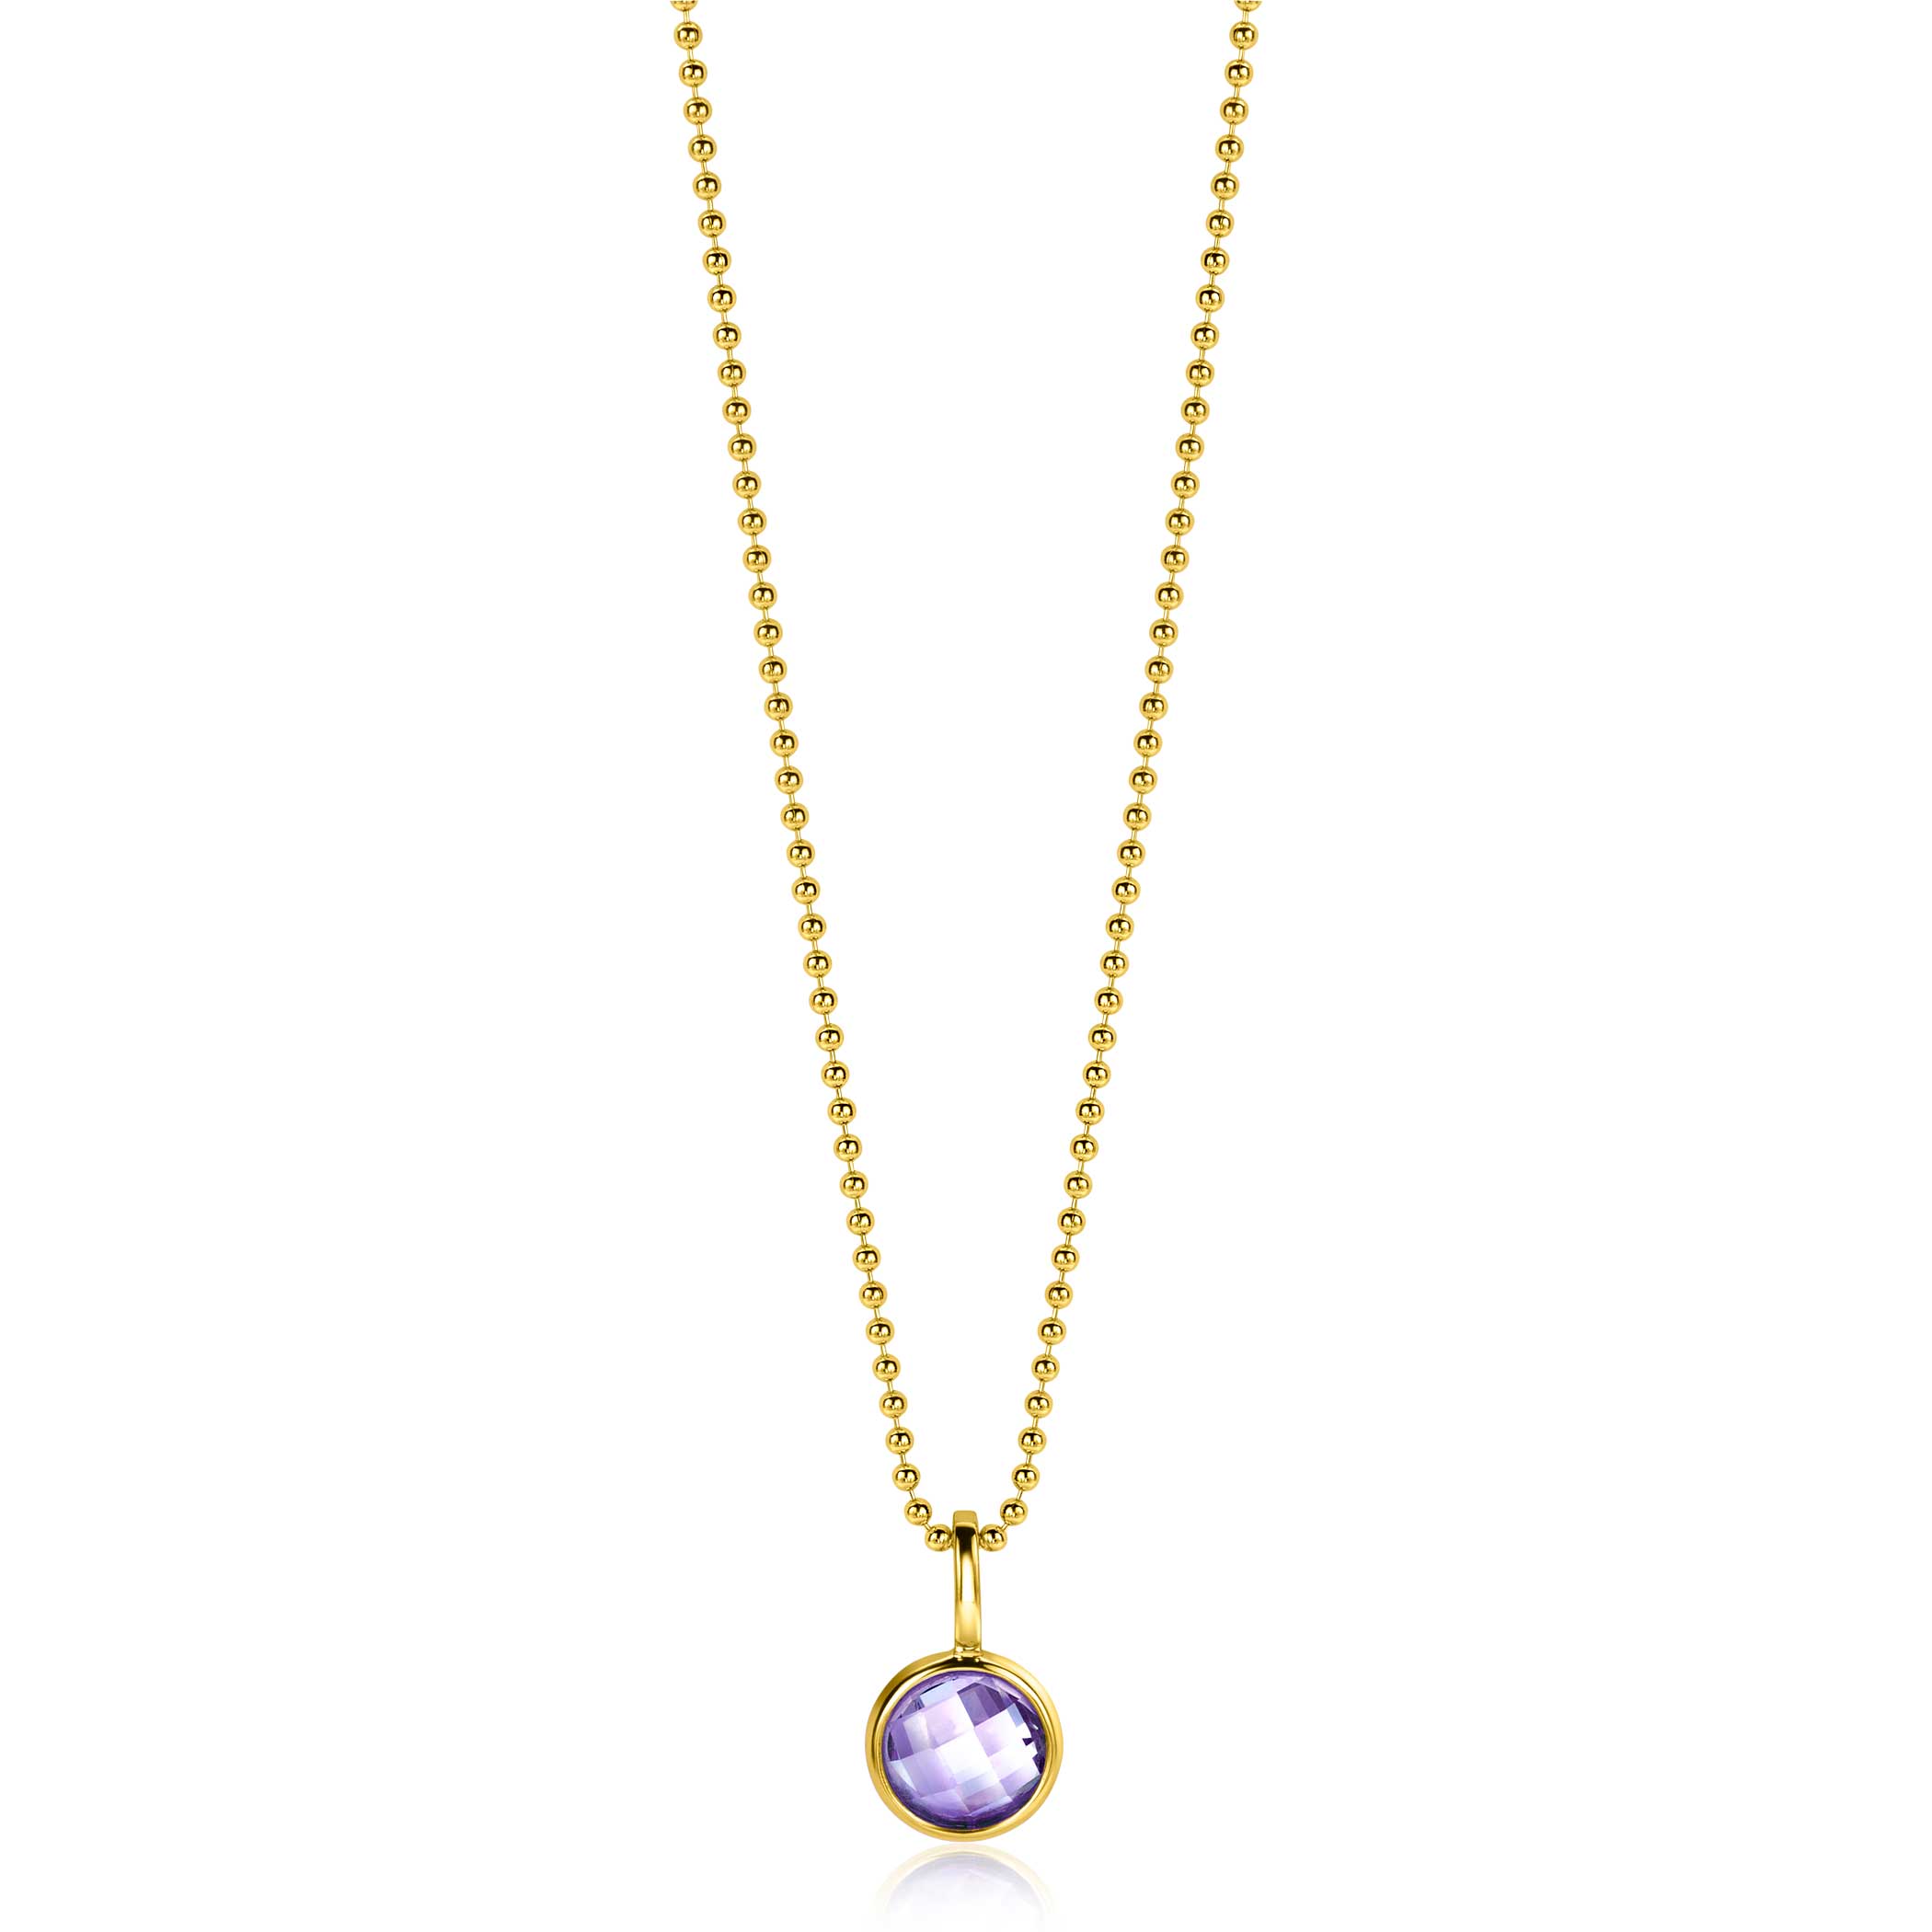 JUNE Pendant 8mm Gold Plated Birthstone Light Purple Amethyst Zirconia (excl. necklace)